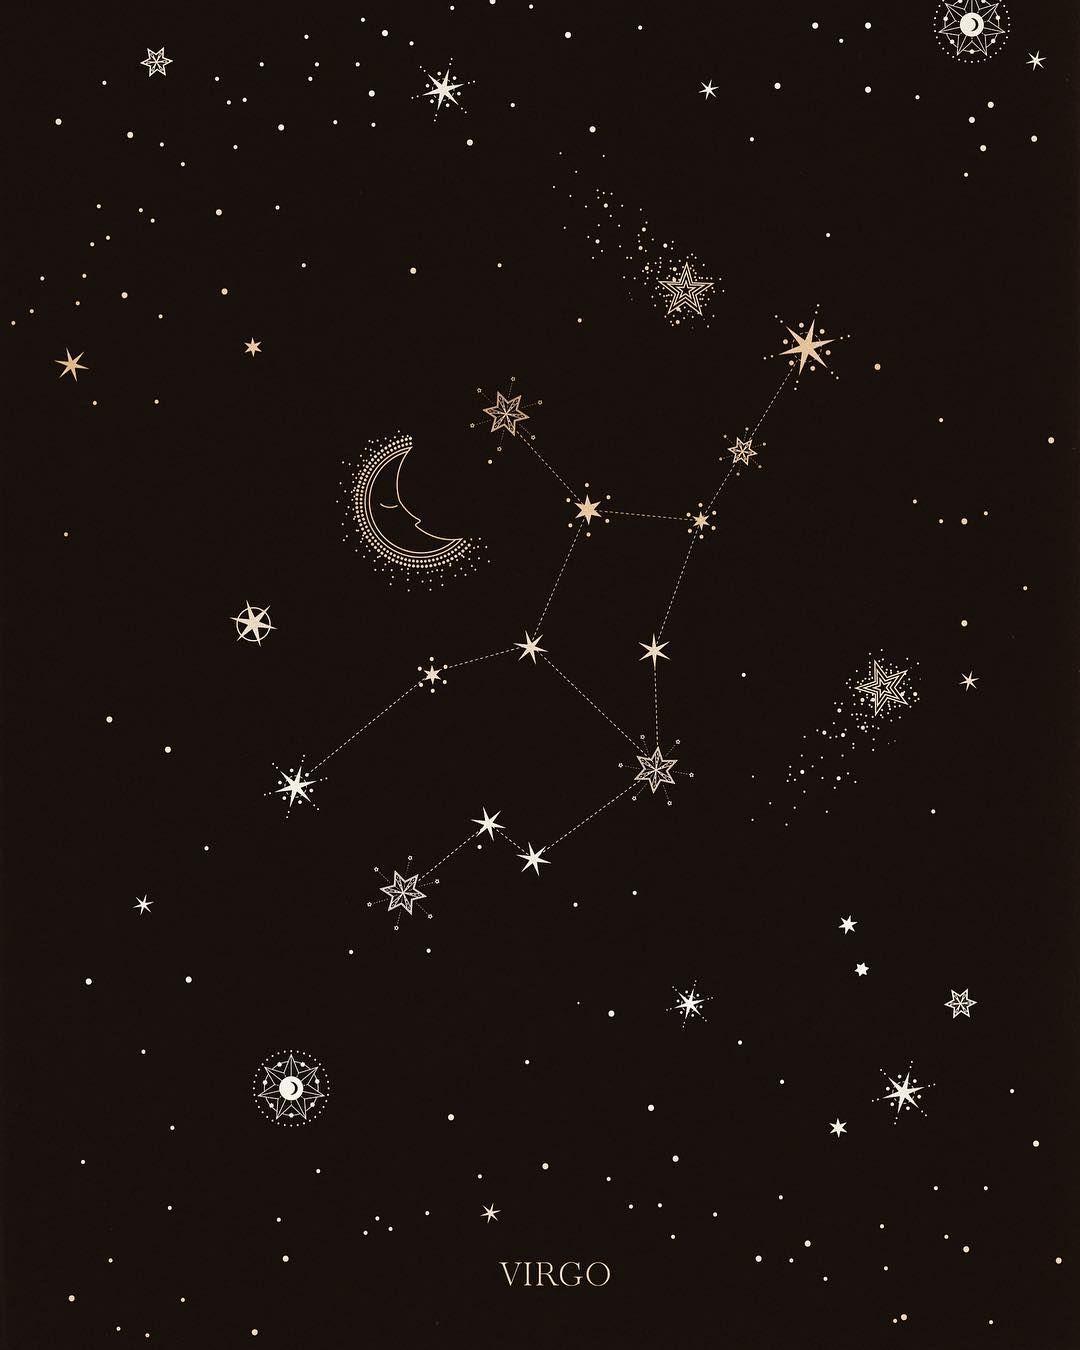 A black poster with Virgo's zodiac sign surrounded by stars - Virgo